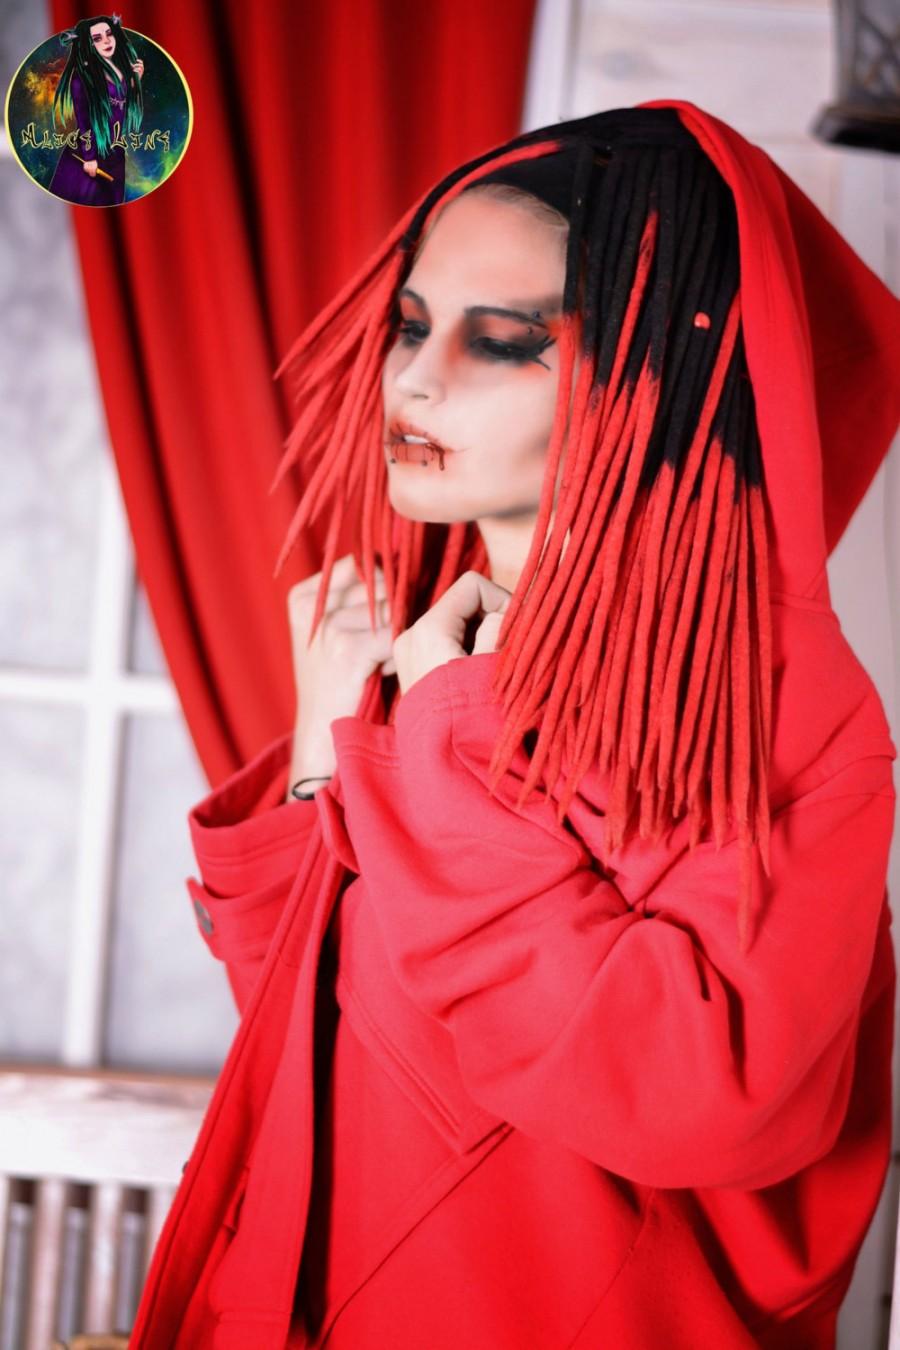 Hochzeit - Set of wool DE dreads " Bloody Red Riding Hood " red black double ended dreads merino full set dreadlocks extensions